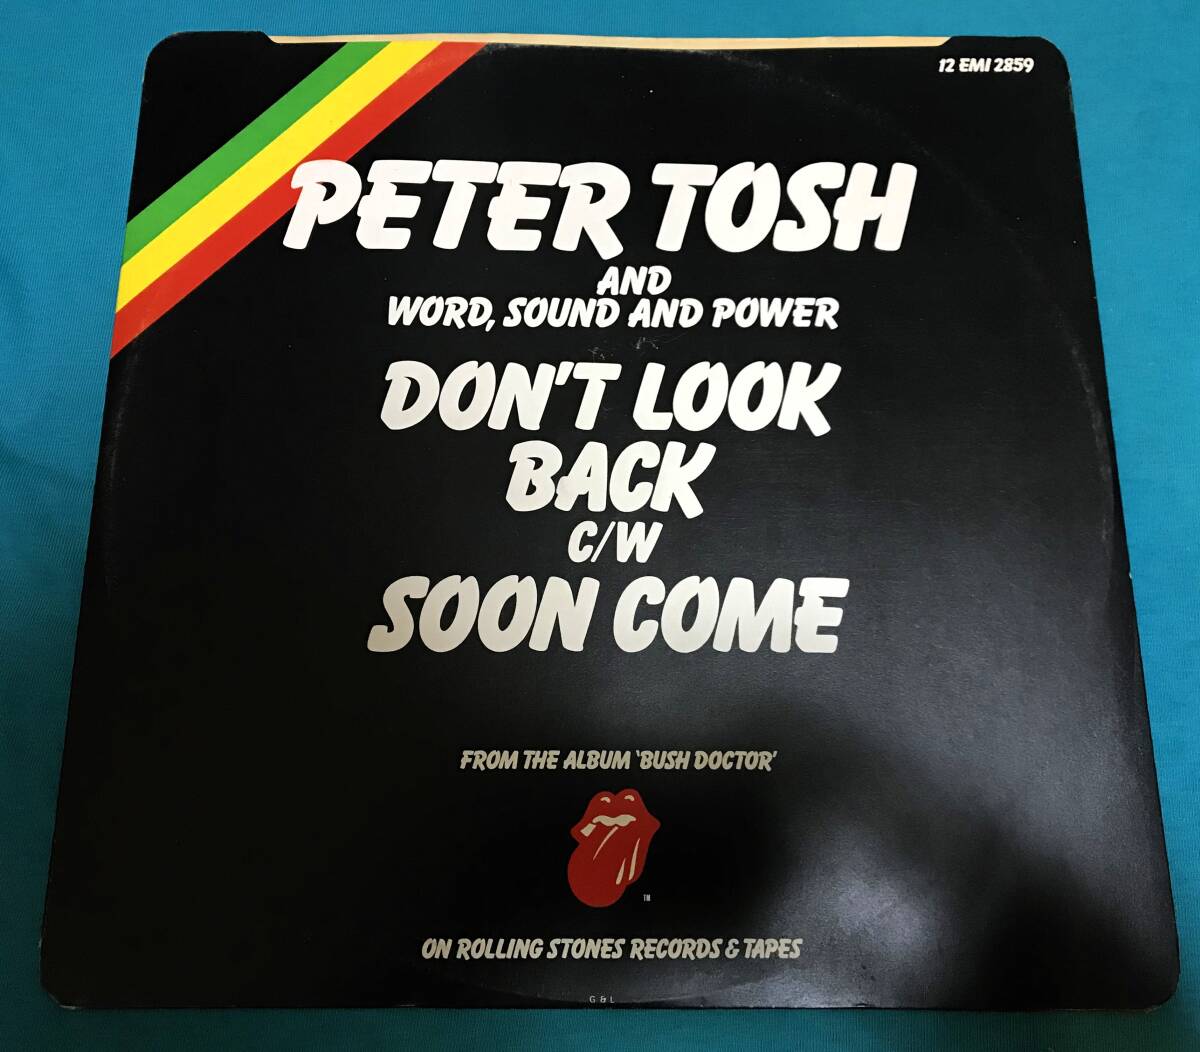 12”●Peter Tosh / Don’t Look Back UKオリジナル盤 Rolling Stones Records 12 EMI 2859_画像2